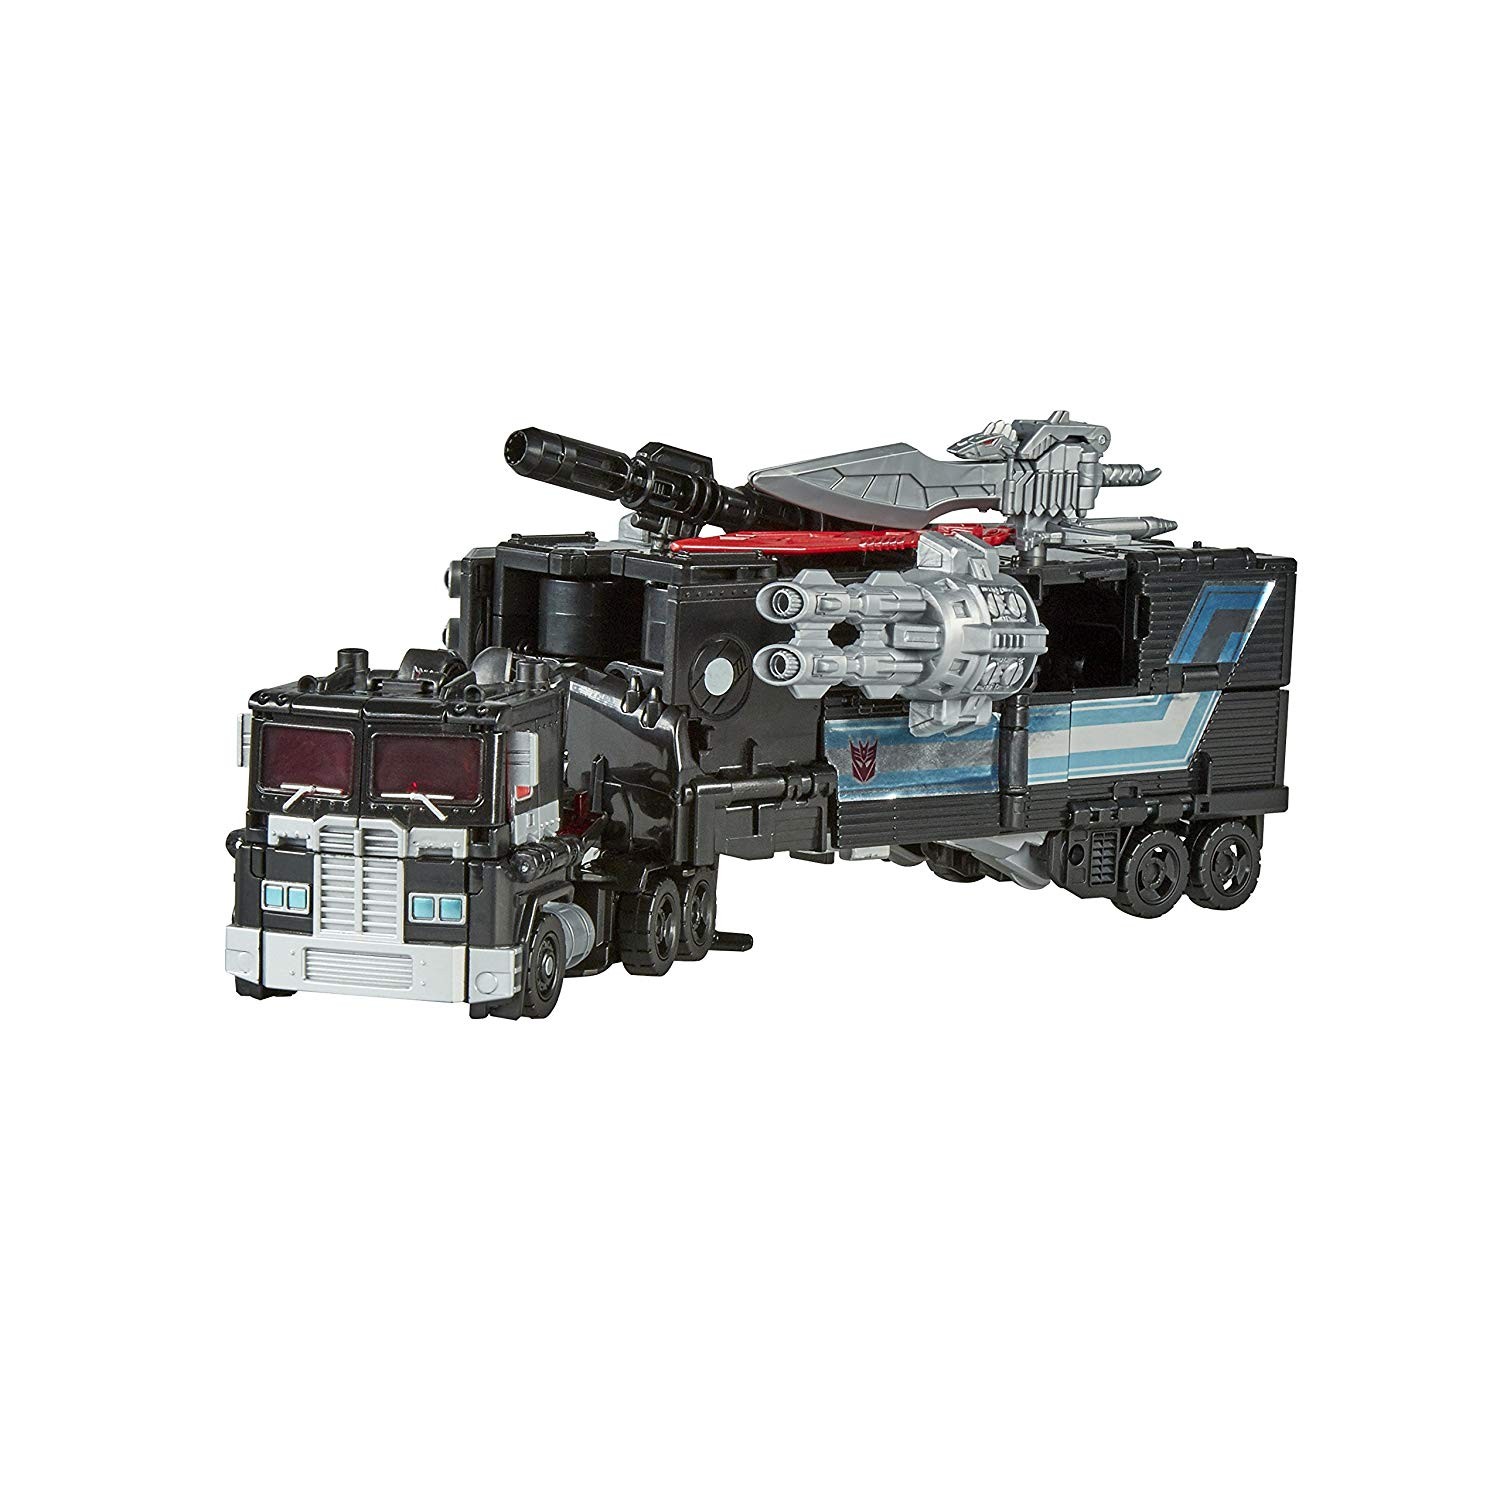 Transformers News: Transformers Power of the Primes Nemesis Prime Confirmed to be a Prime Day Item